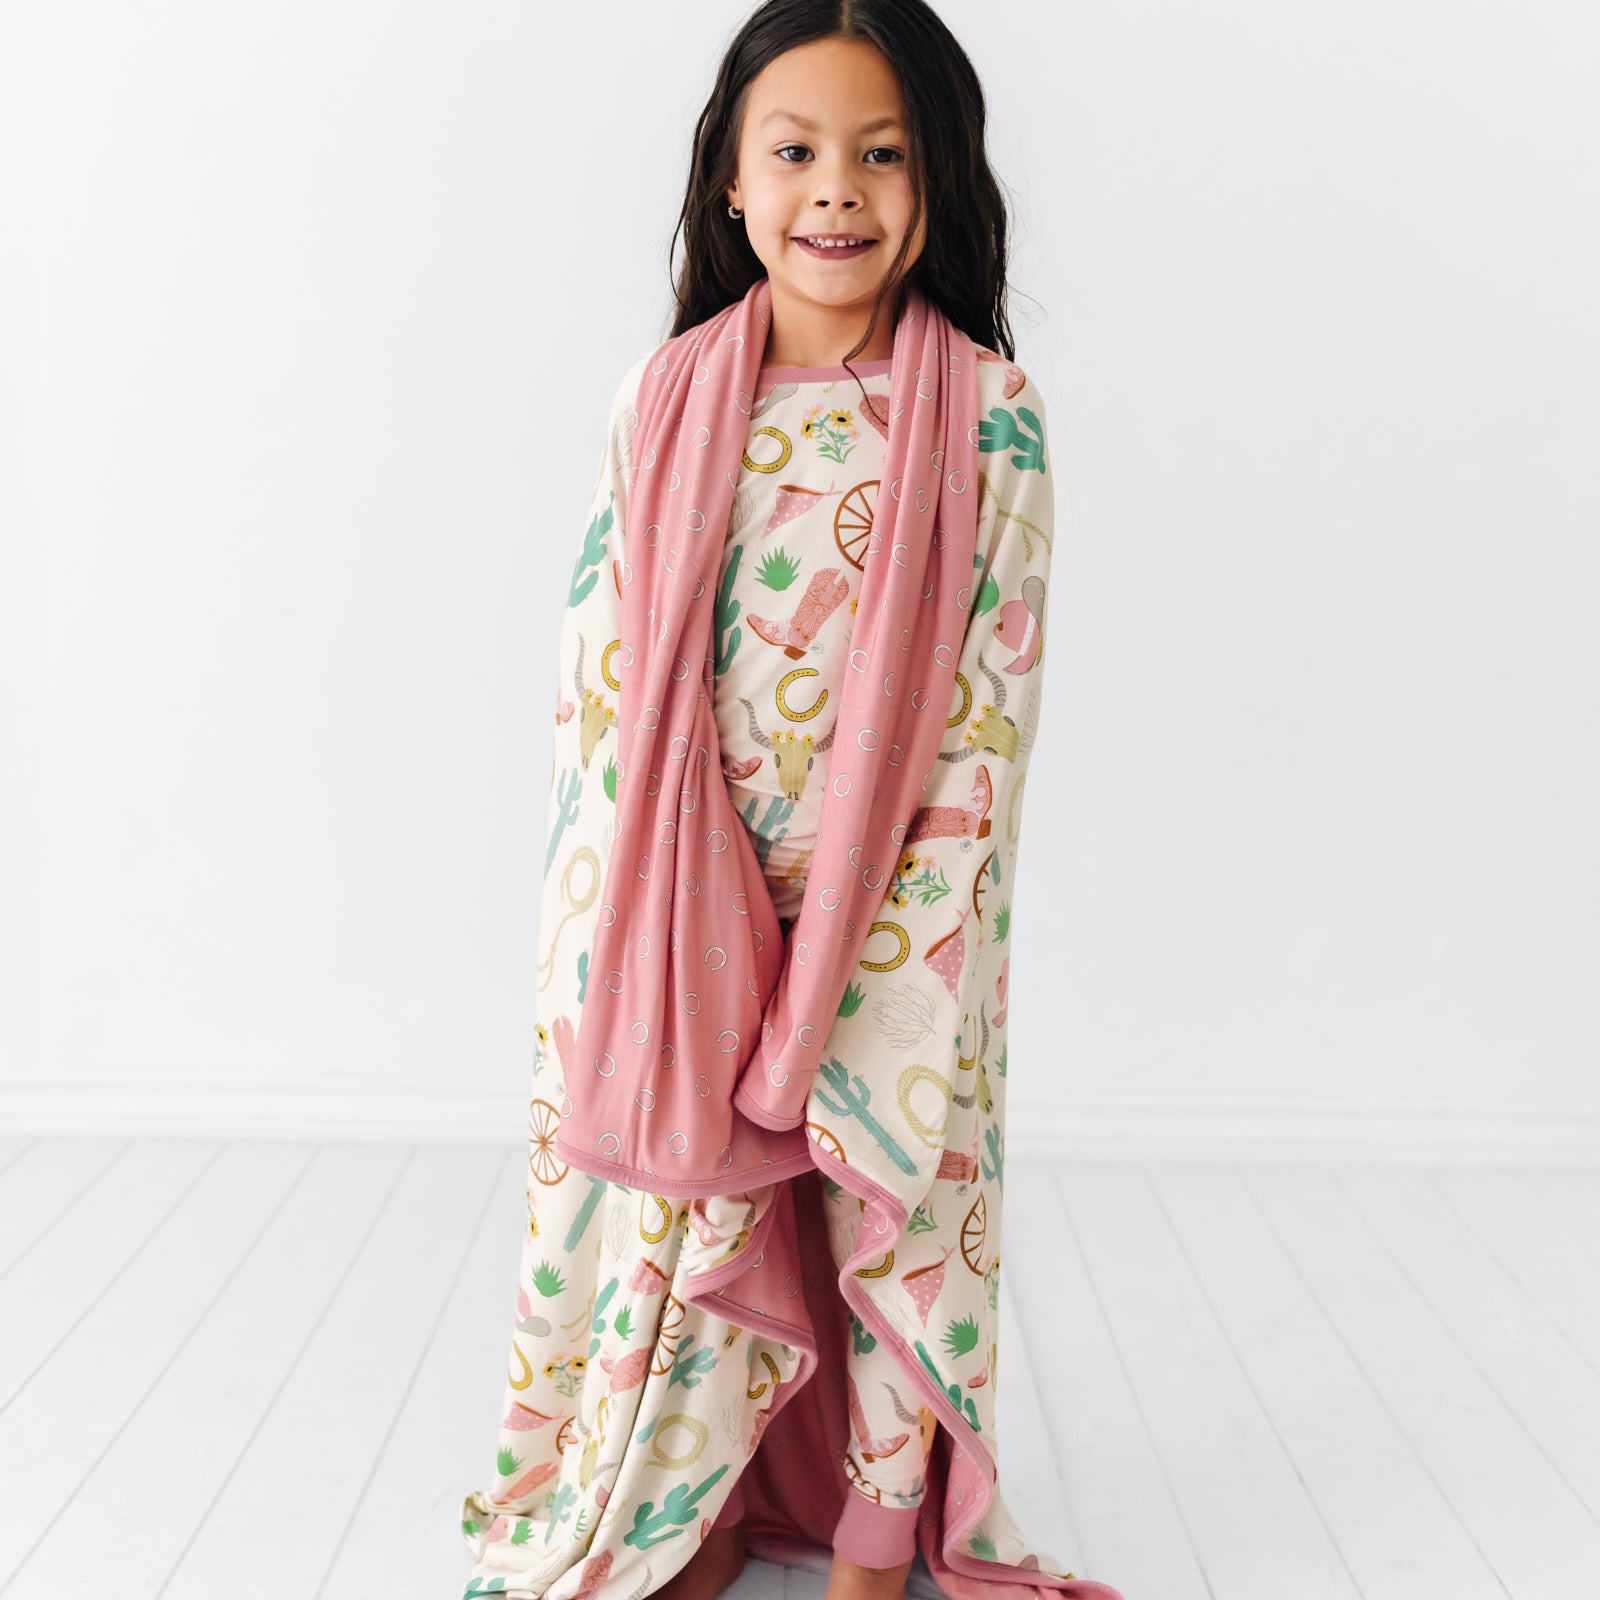 Child wrapped up in a Pink Ready to Rodeo large cloud blanket wearing a matching two piece pajama set